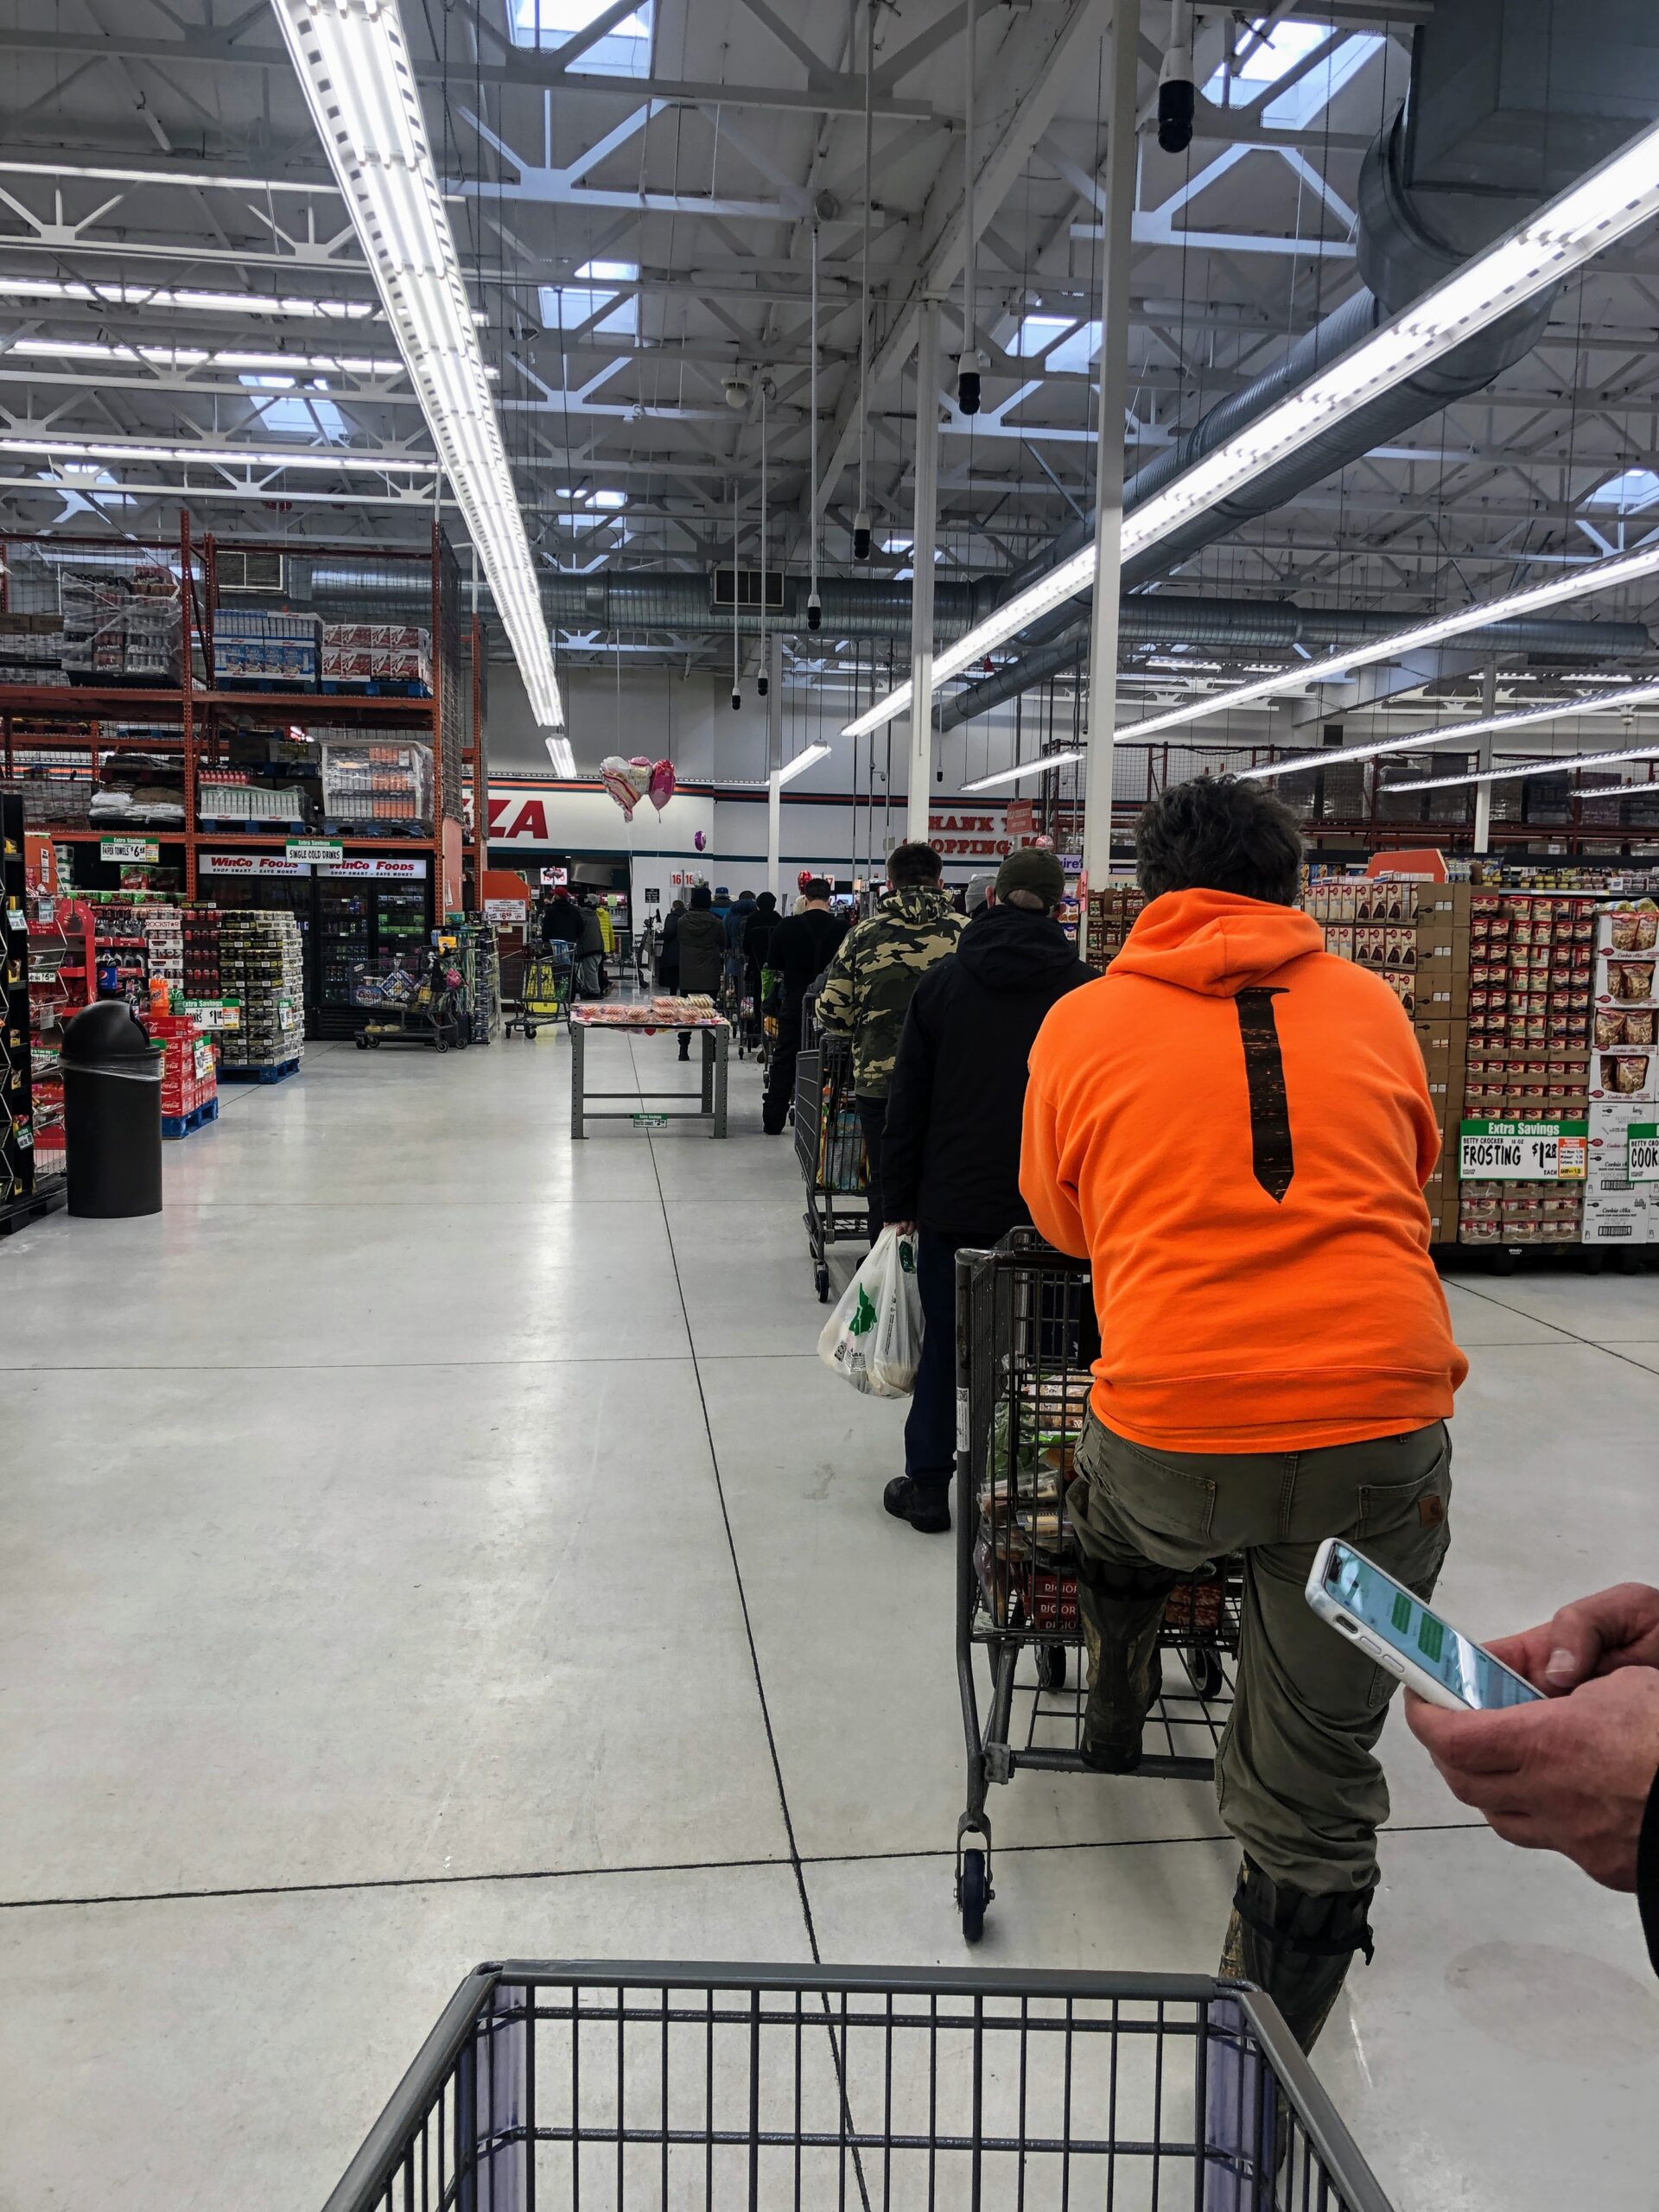 Grocery store with long line of people waiting to check out.